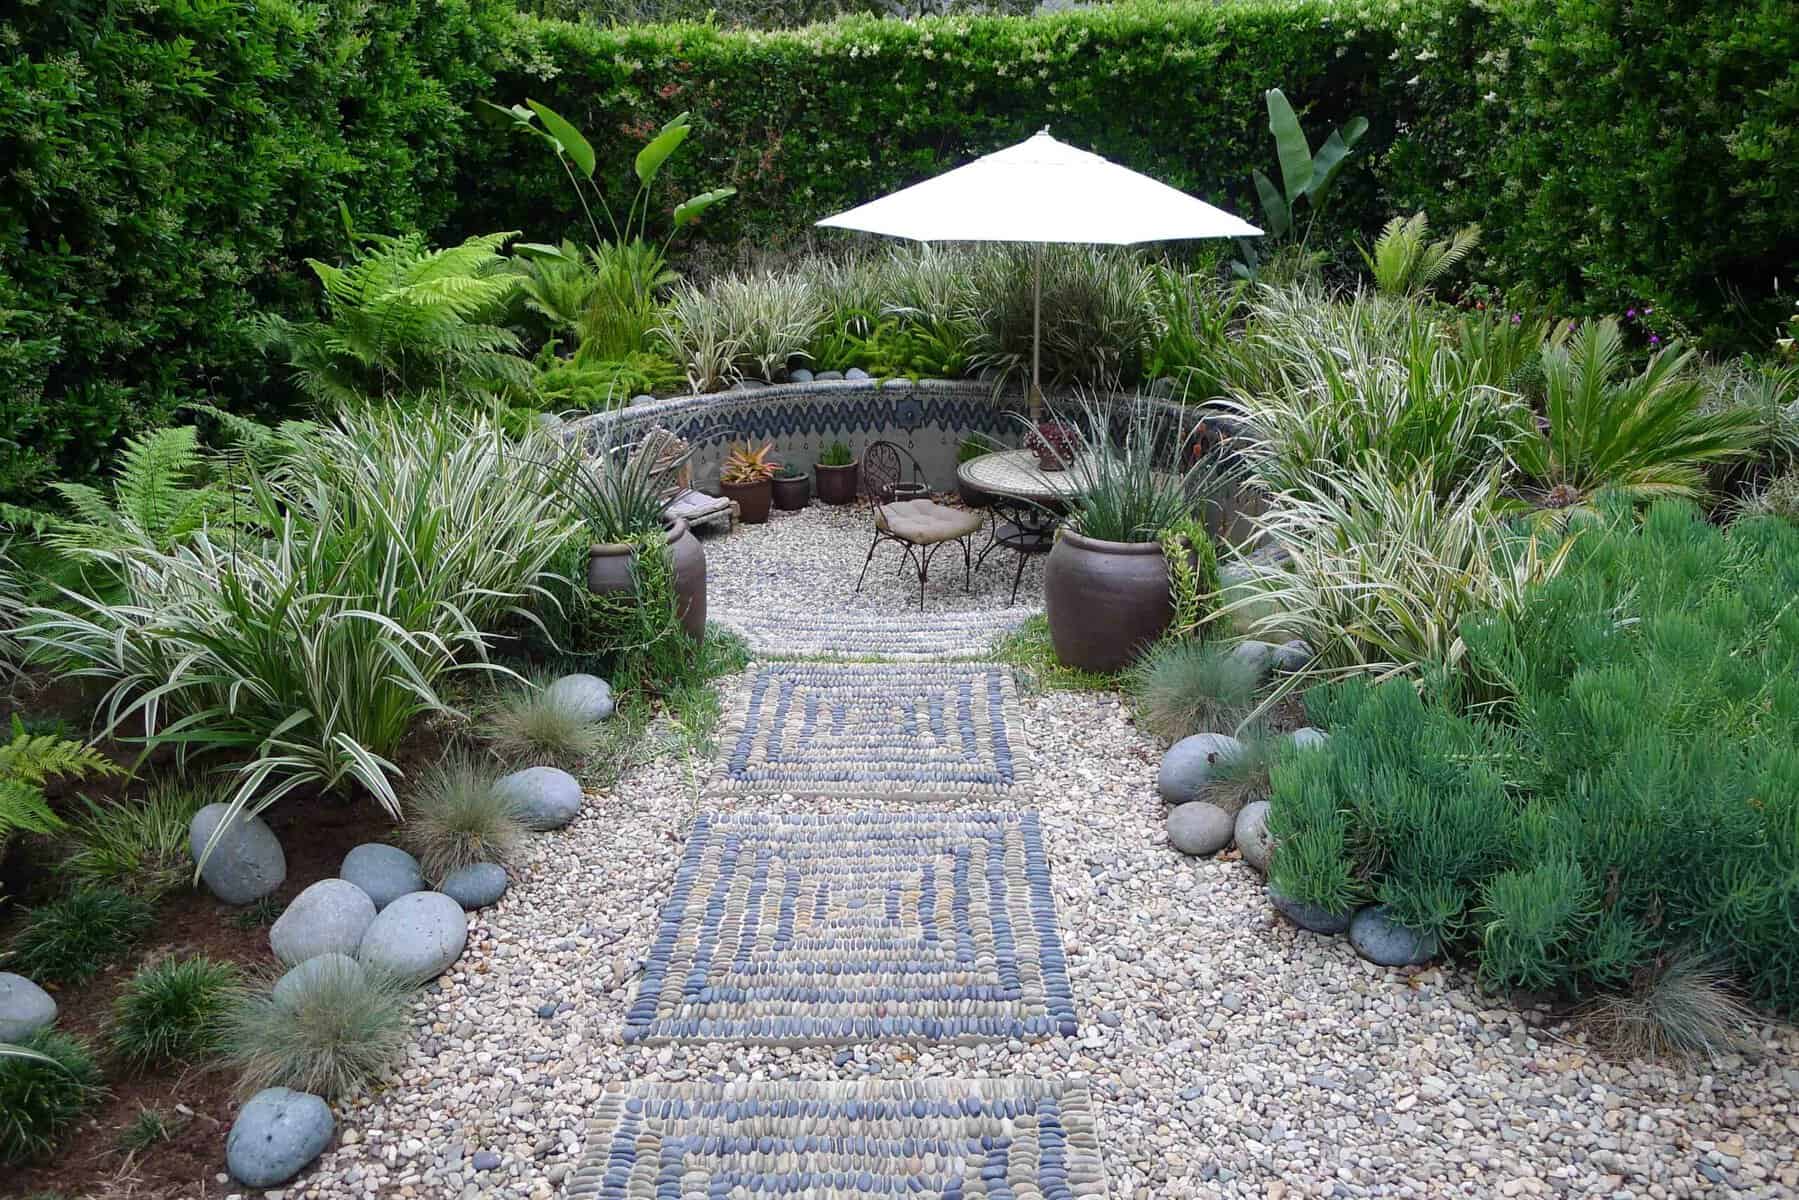 A lush garden features a stone pathway leading to a cozy seating area with a round table, two chairs, and a white umbrella. Greenery, including various shrubs and tall plants, surrounds the space. Several large potted plants and decorative stones complete this ideal backyard yoga studio.